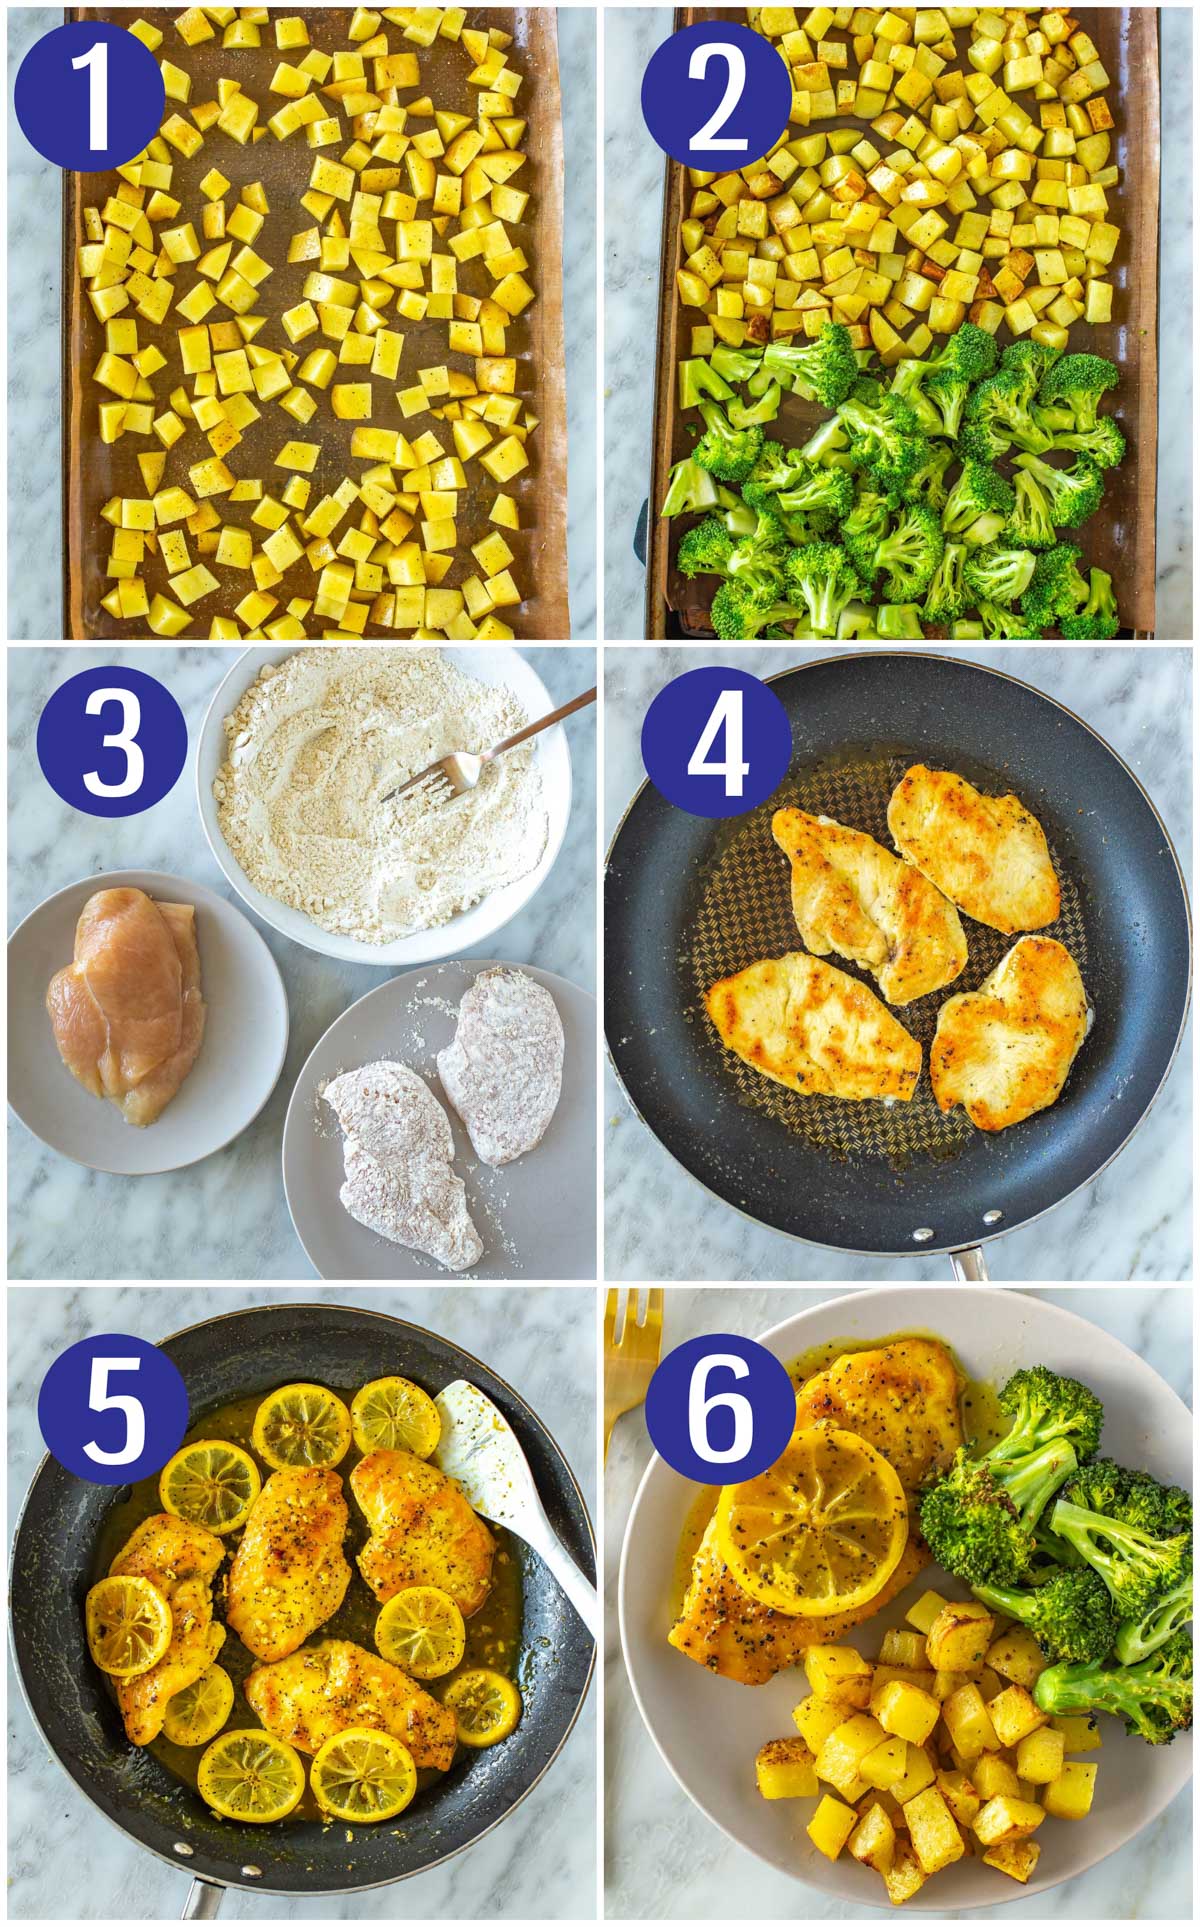 Step-by-step instructions collage for making lemon pepper chicken: roast potatoes, add broccoli in the last 10 minutes of cook time, coat chicken in lemon pepper/flour mixture, cook chicken on the skillet, make sauce, and serve.